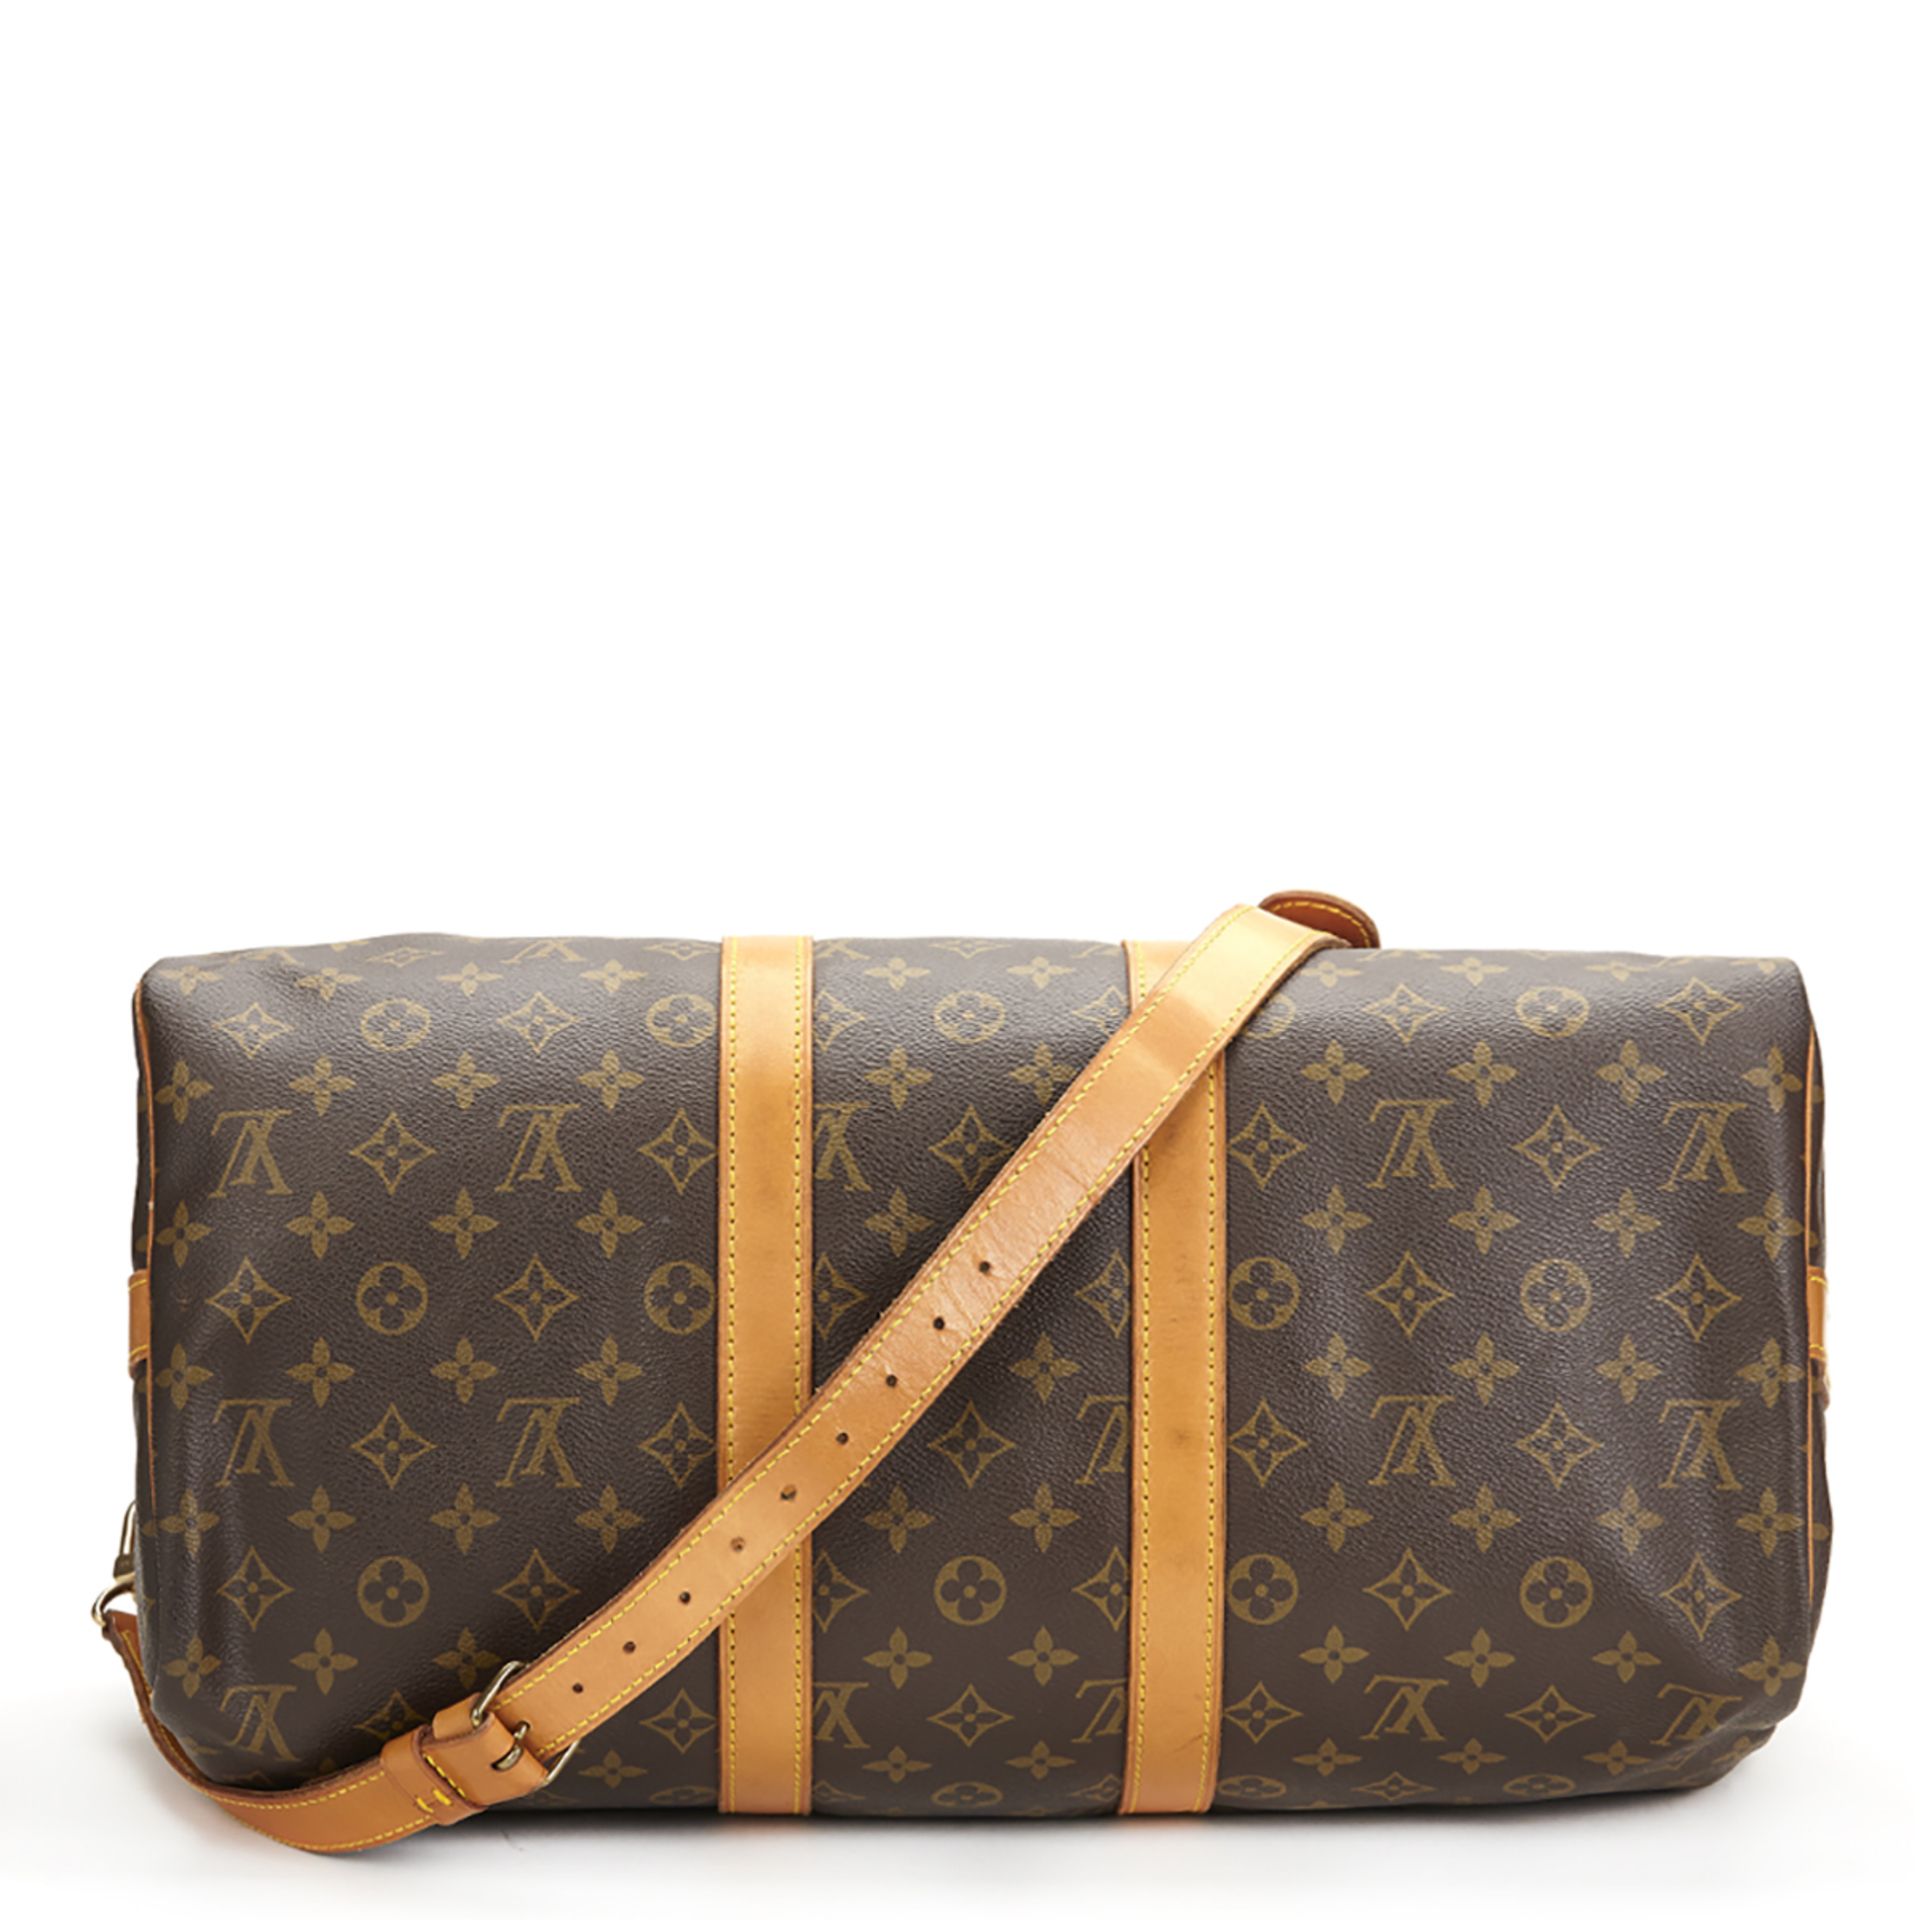 Louis Vuitton, Keepall Bandouliere 45 - Image 5 of 7